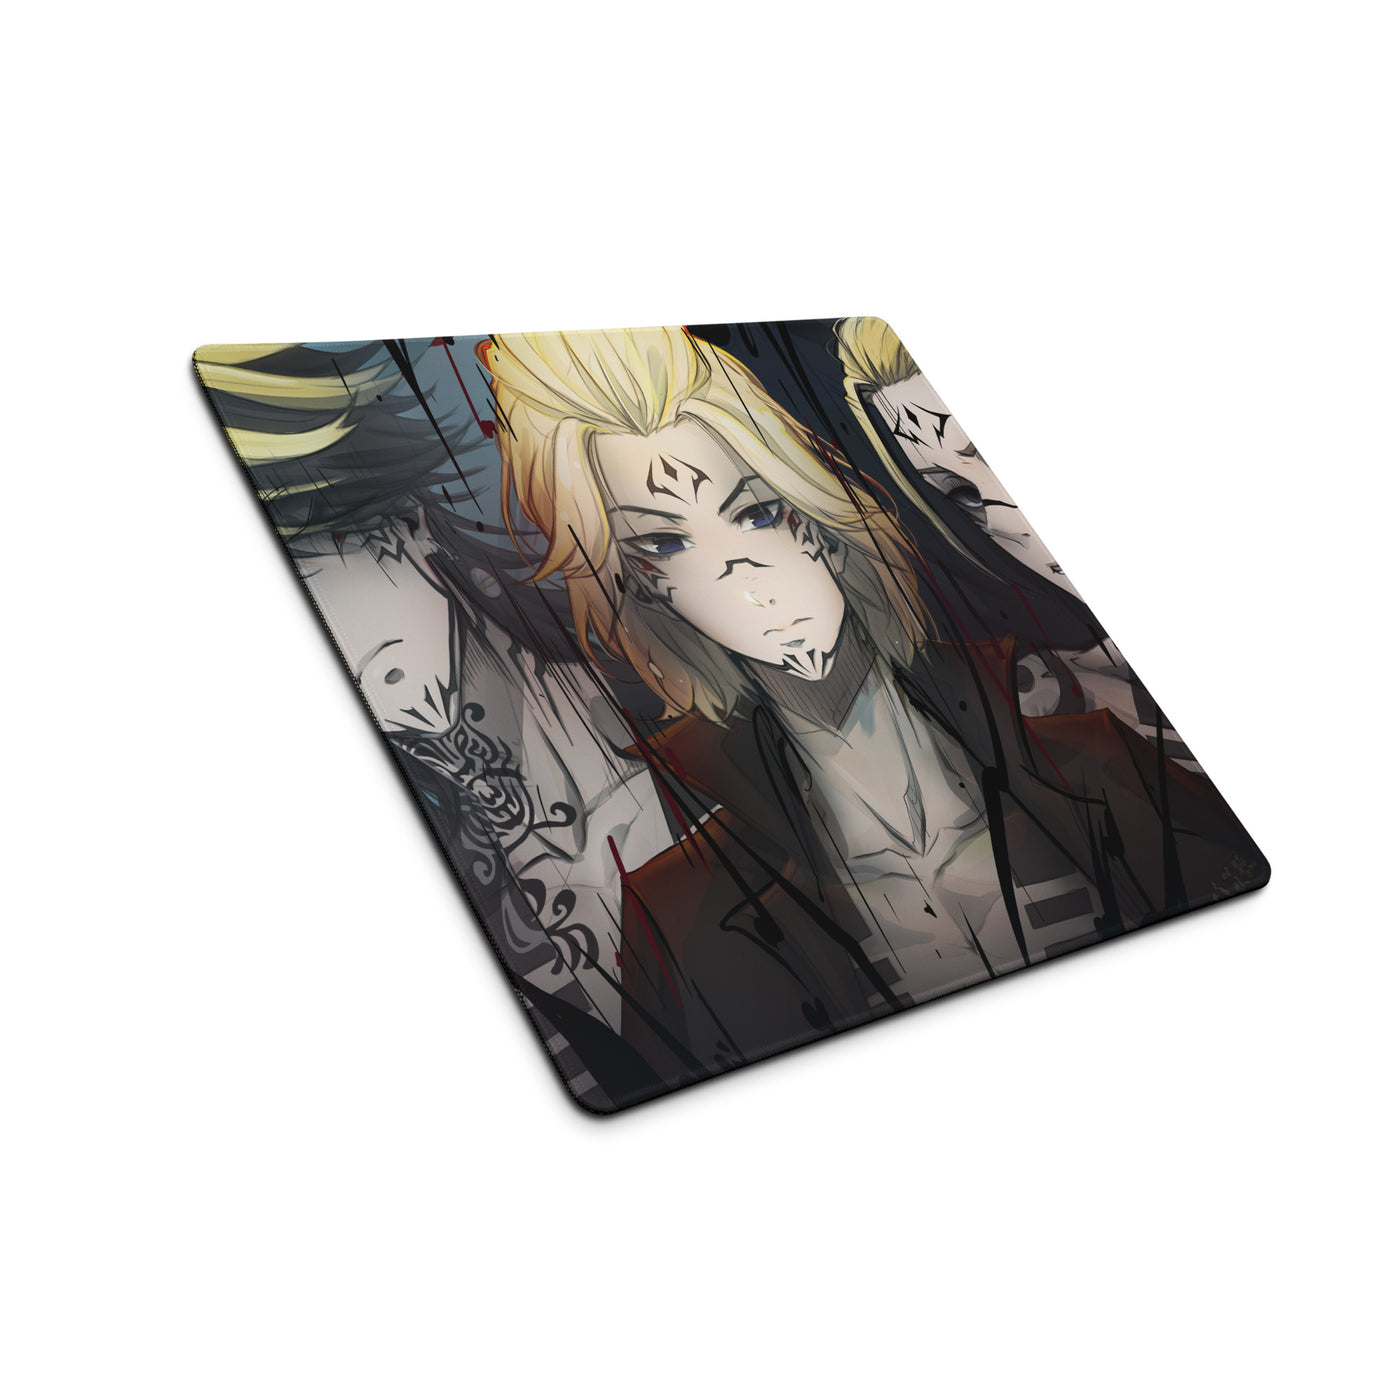 Tokyo Revengers x Sukuna Gaming mouse pad